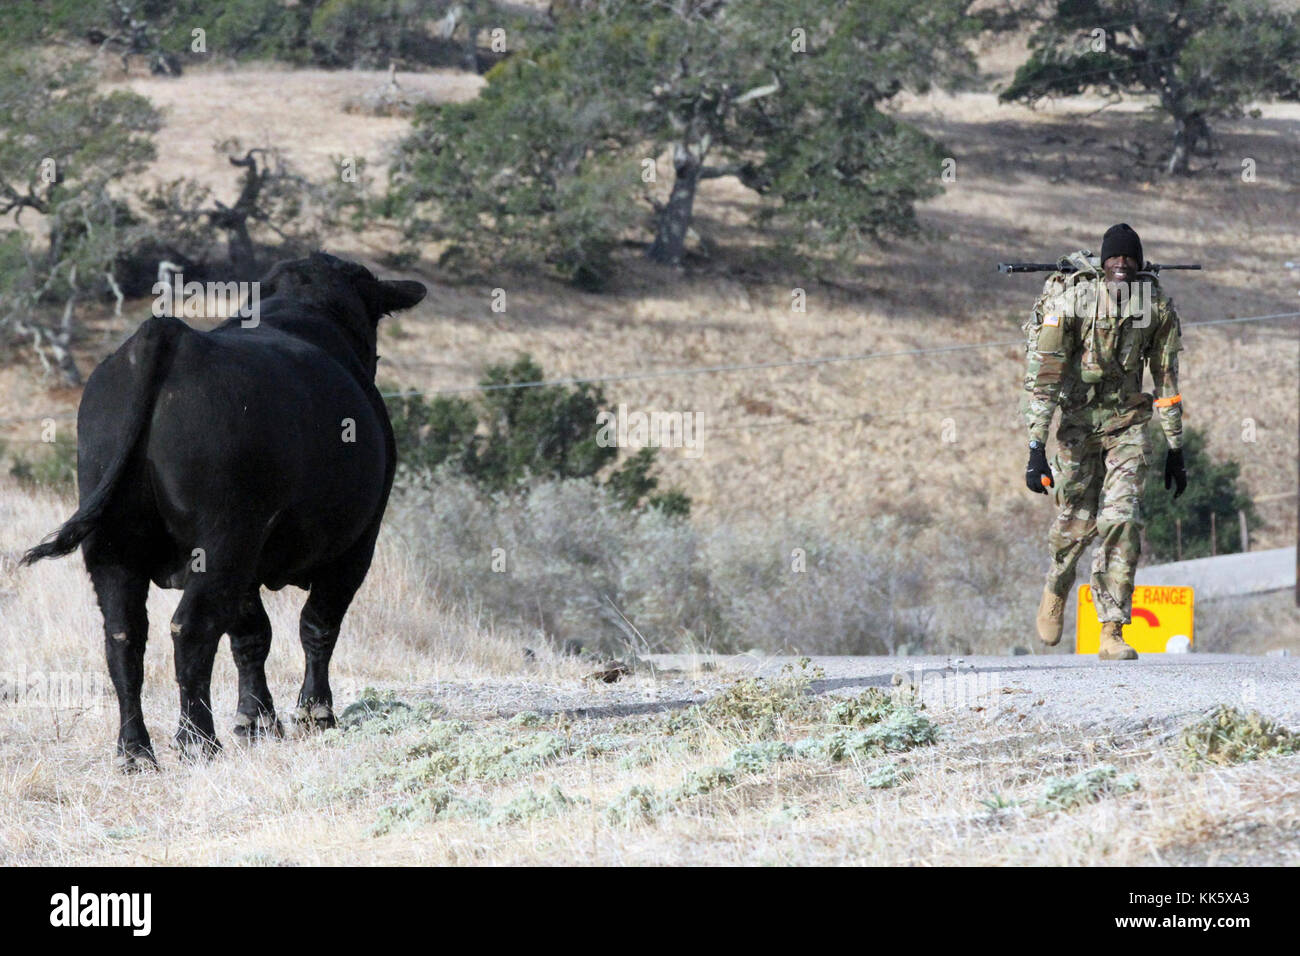 Spc. Deng A. Deng, right, gets an unusual spectator — a 3,000-pound bull — as he enters the finish line of the 12-mile Ruck Sack March Nov. 6 in the 2017-18 California Army National Guard Best Warrior Competition at Camp San Luis Obispo, California. Deng was first overall to complete the course. (Army National Guard photo by Staff Sgt. Eddie Siguenza) Stock Photo